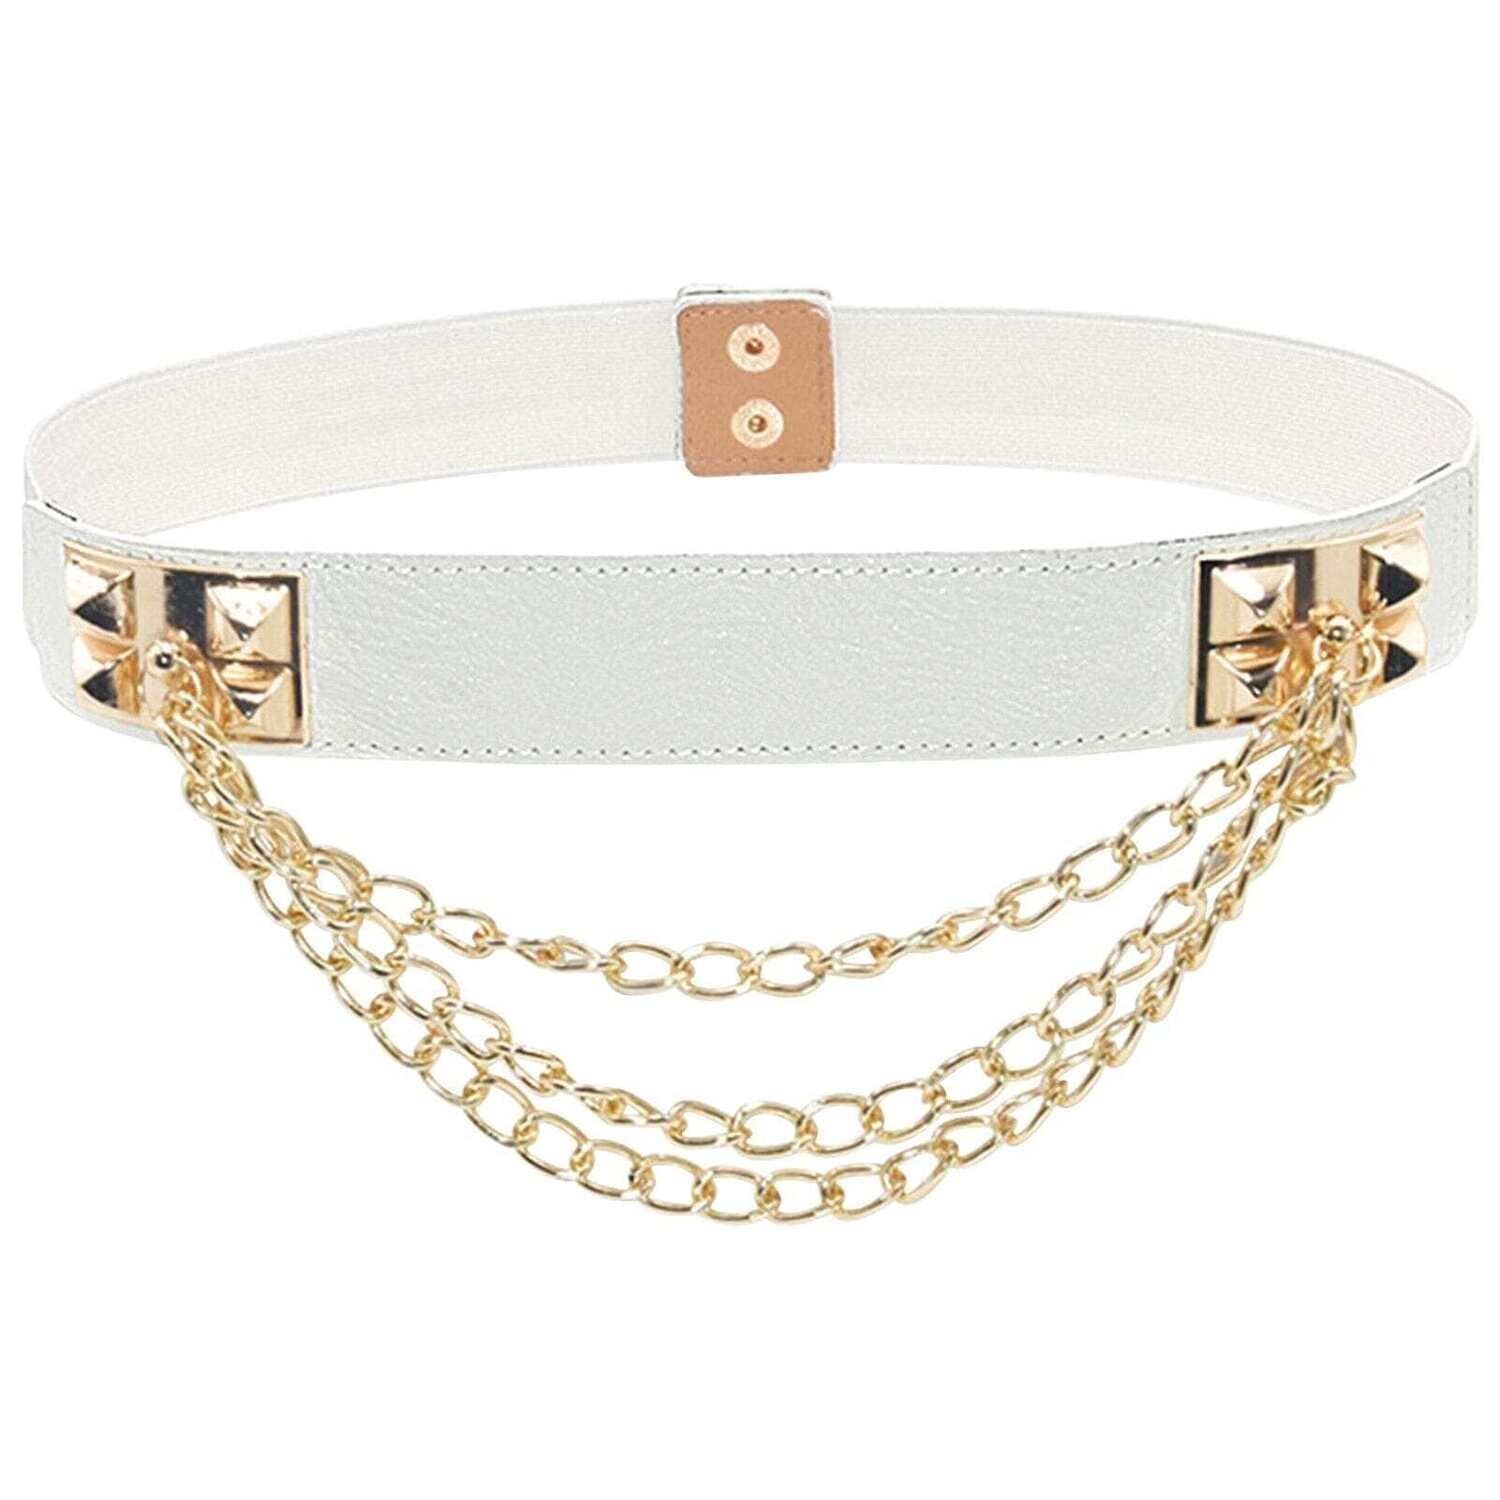 Women Lazy Punk Gold Chain Daily Wide Metal Rivet Elastic Waistband Luxury Leather Belt